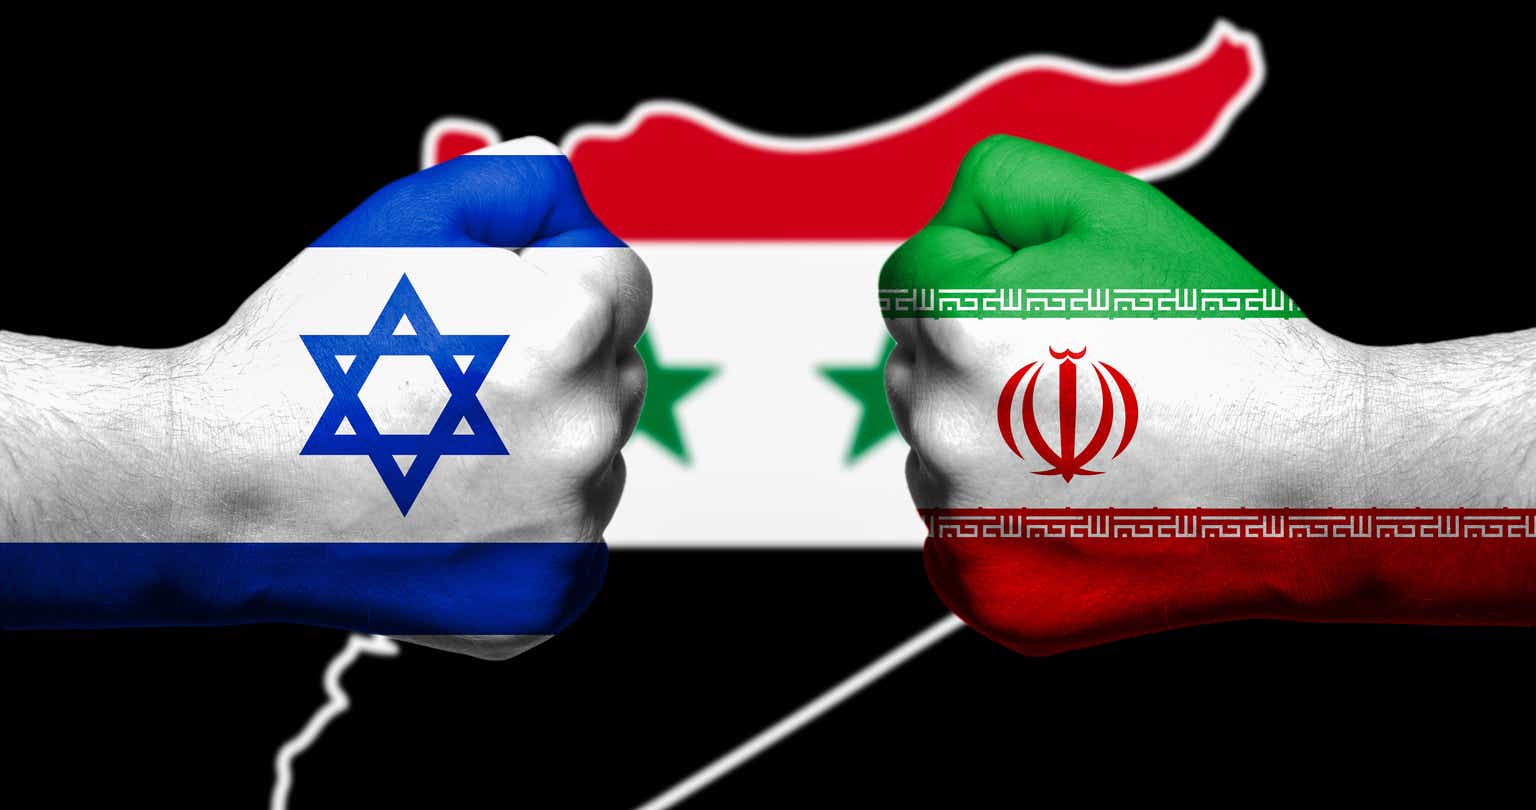 Iran Attacks Israel - How Could Markets Be Impacted?